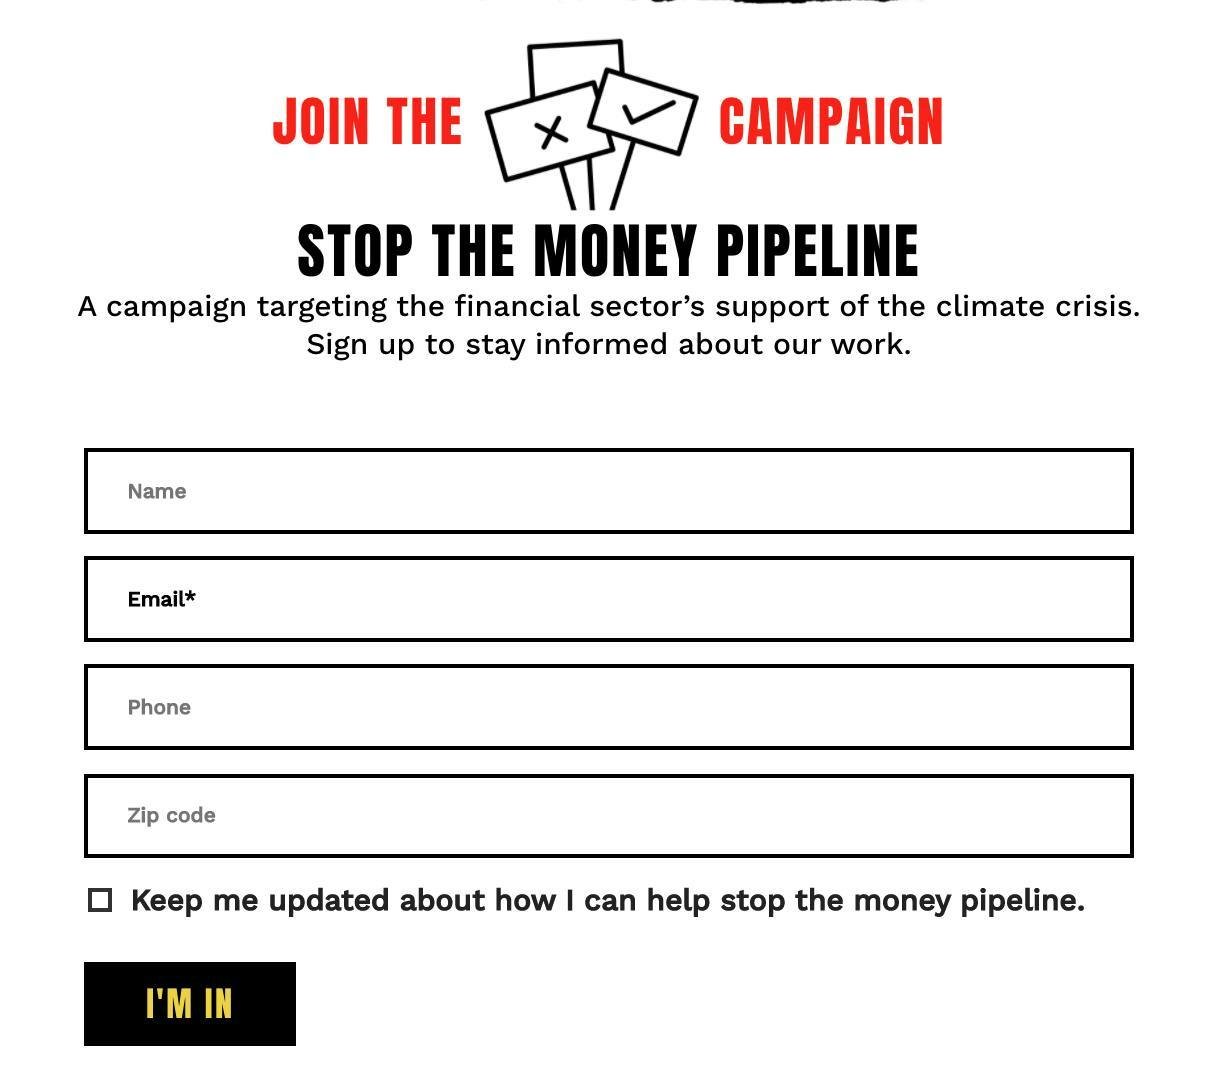 Stop the money pipeline form - join the campaign